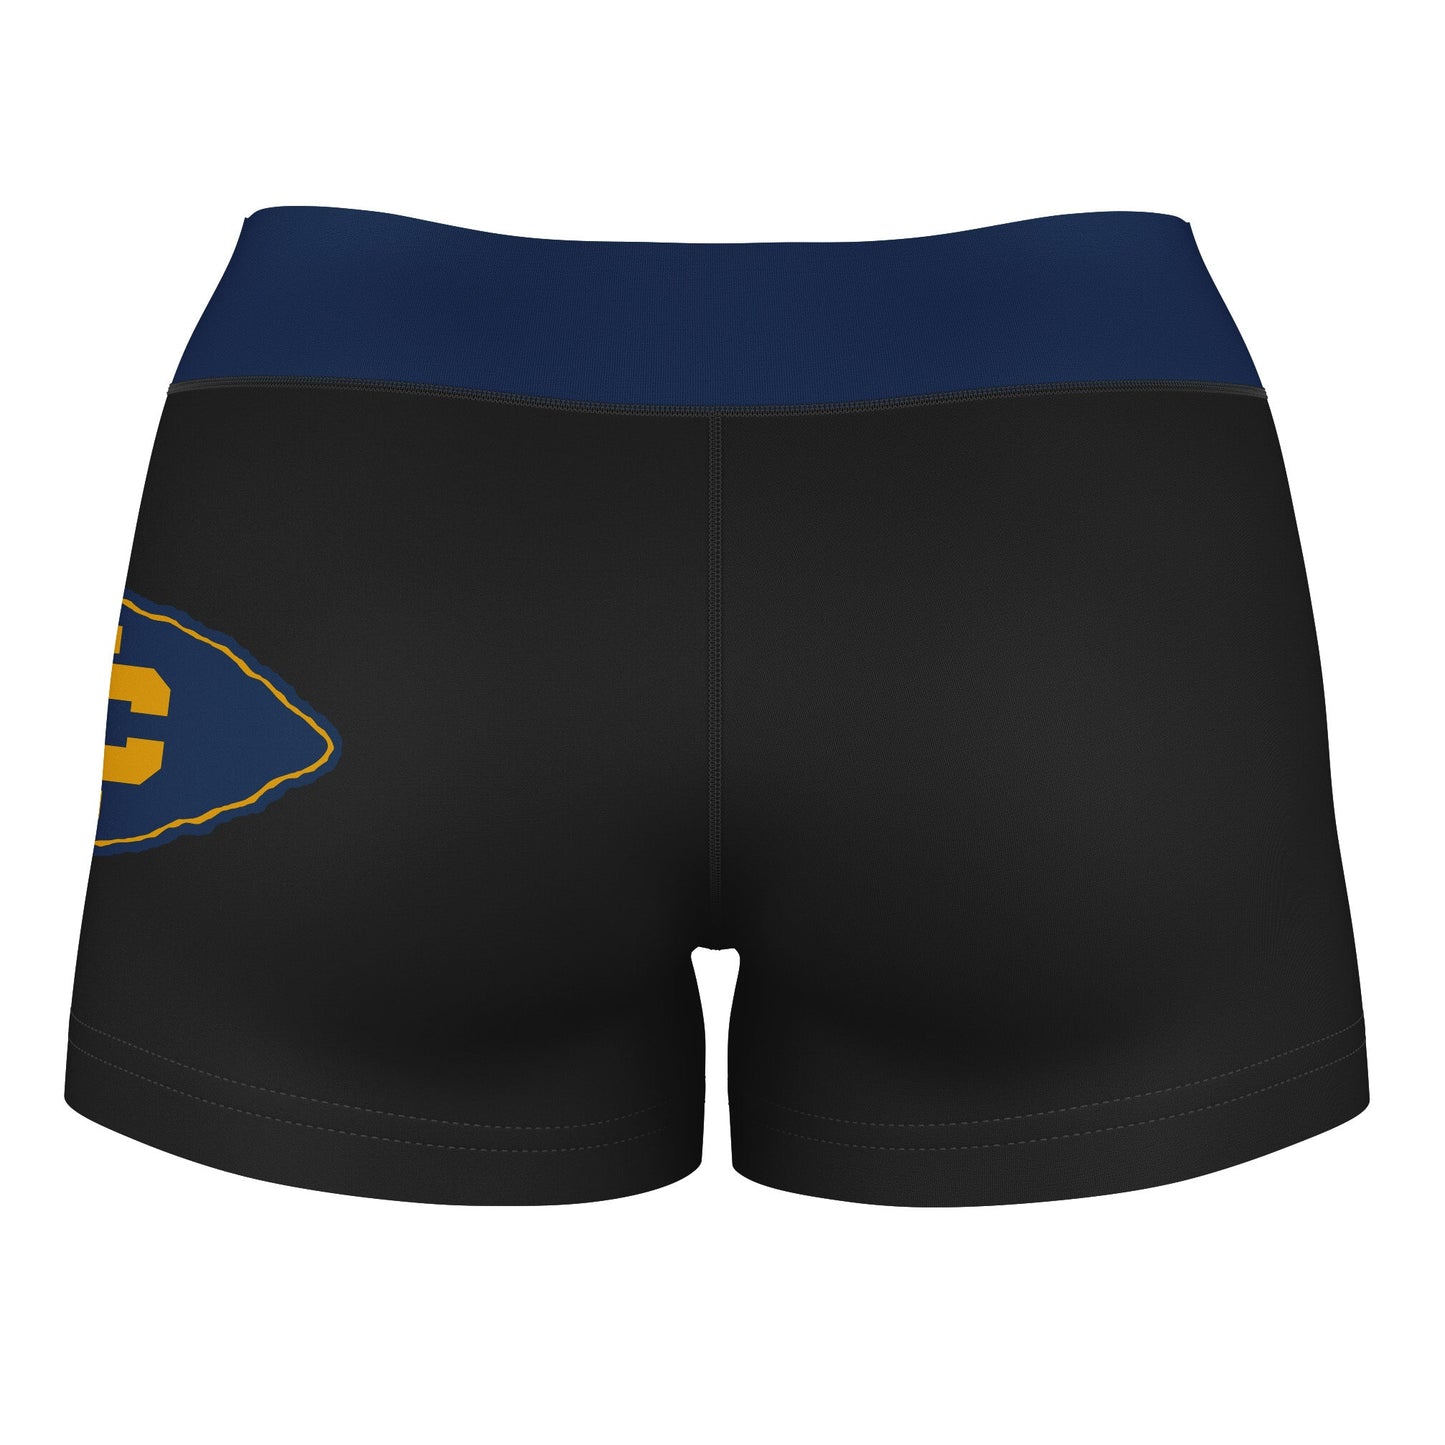 Mississippi College Choctaws Logo on Thigh & Waistband Black & Blue Women Yoga Booty Workout Shorts 3.75 Inseam" - Vive La F̻te - Online Apparel Store